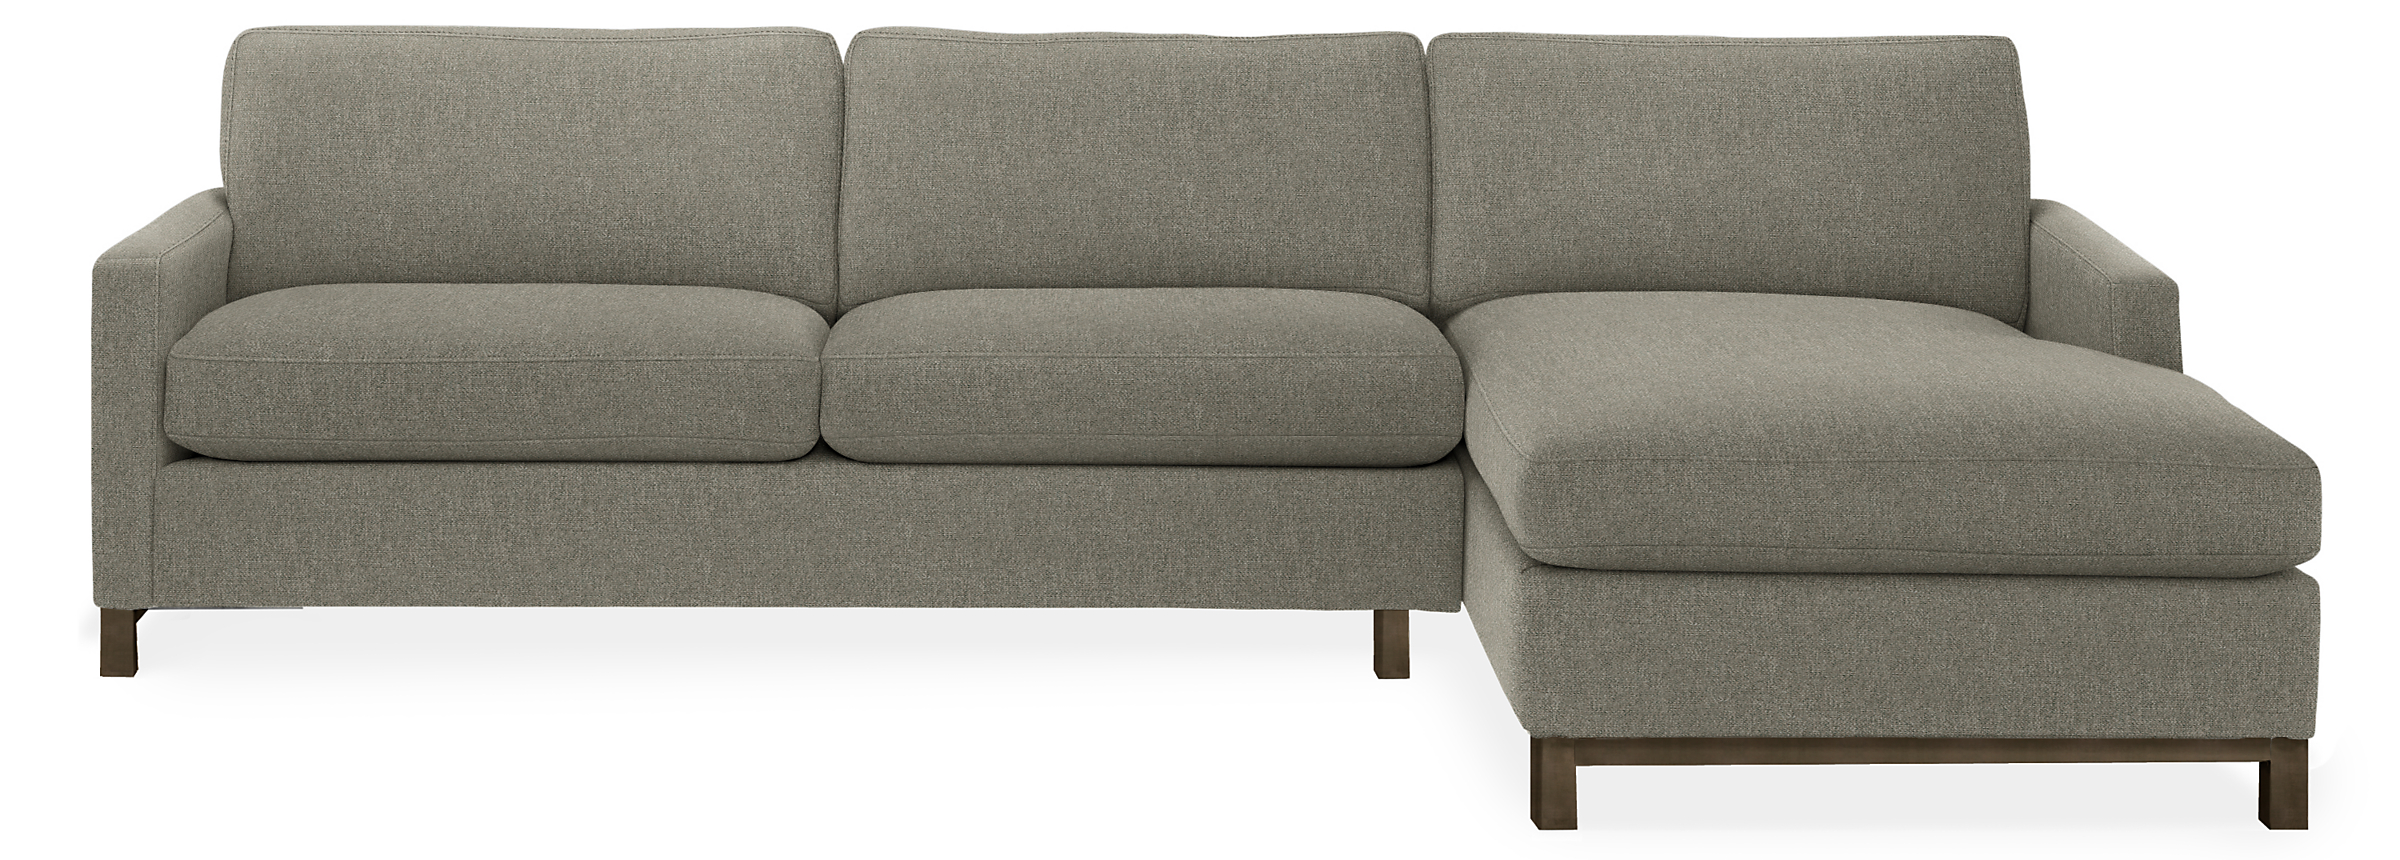 Stevens 116" Sofa with Right-Arm Chaise